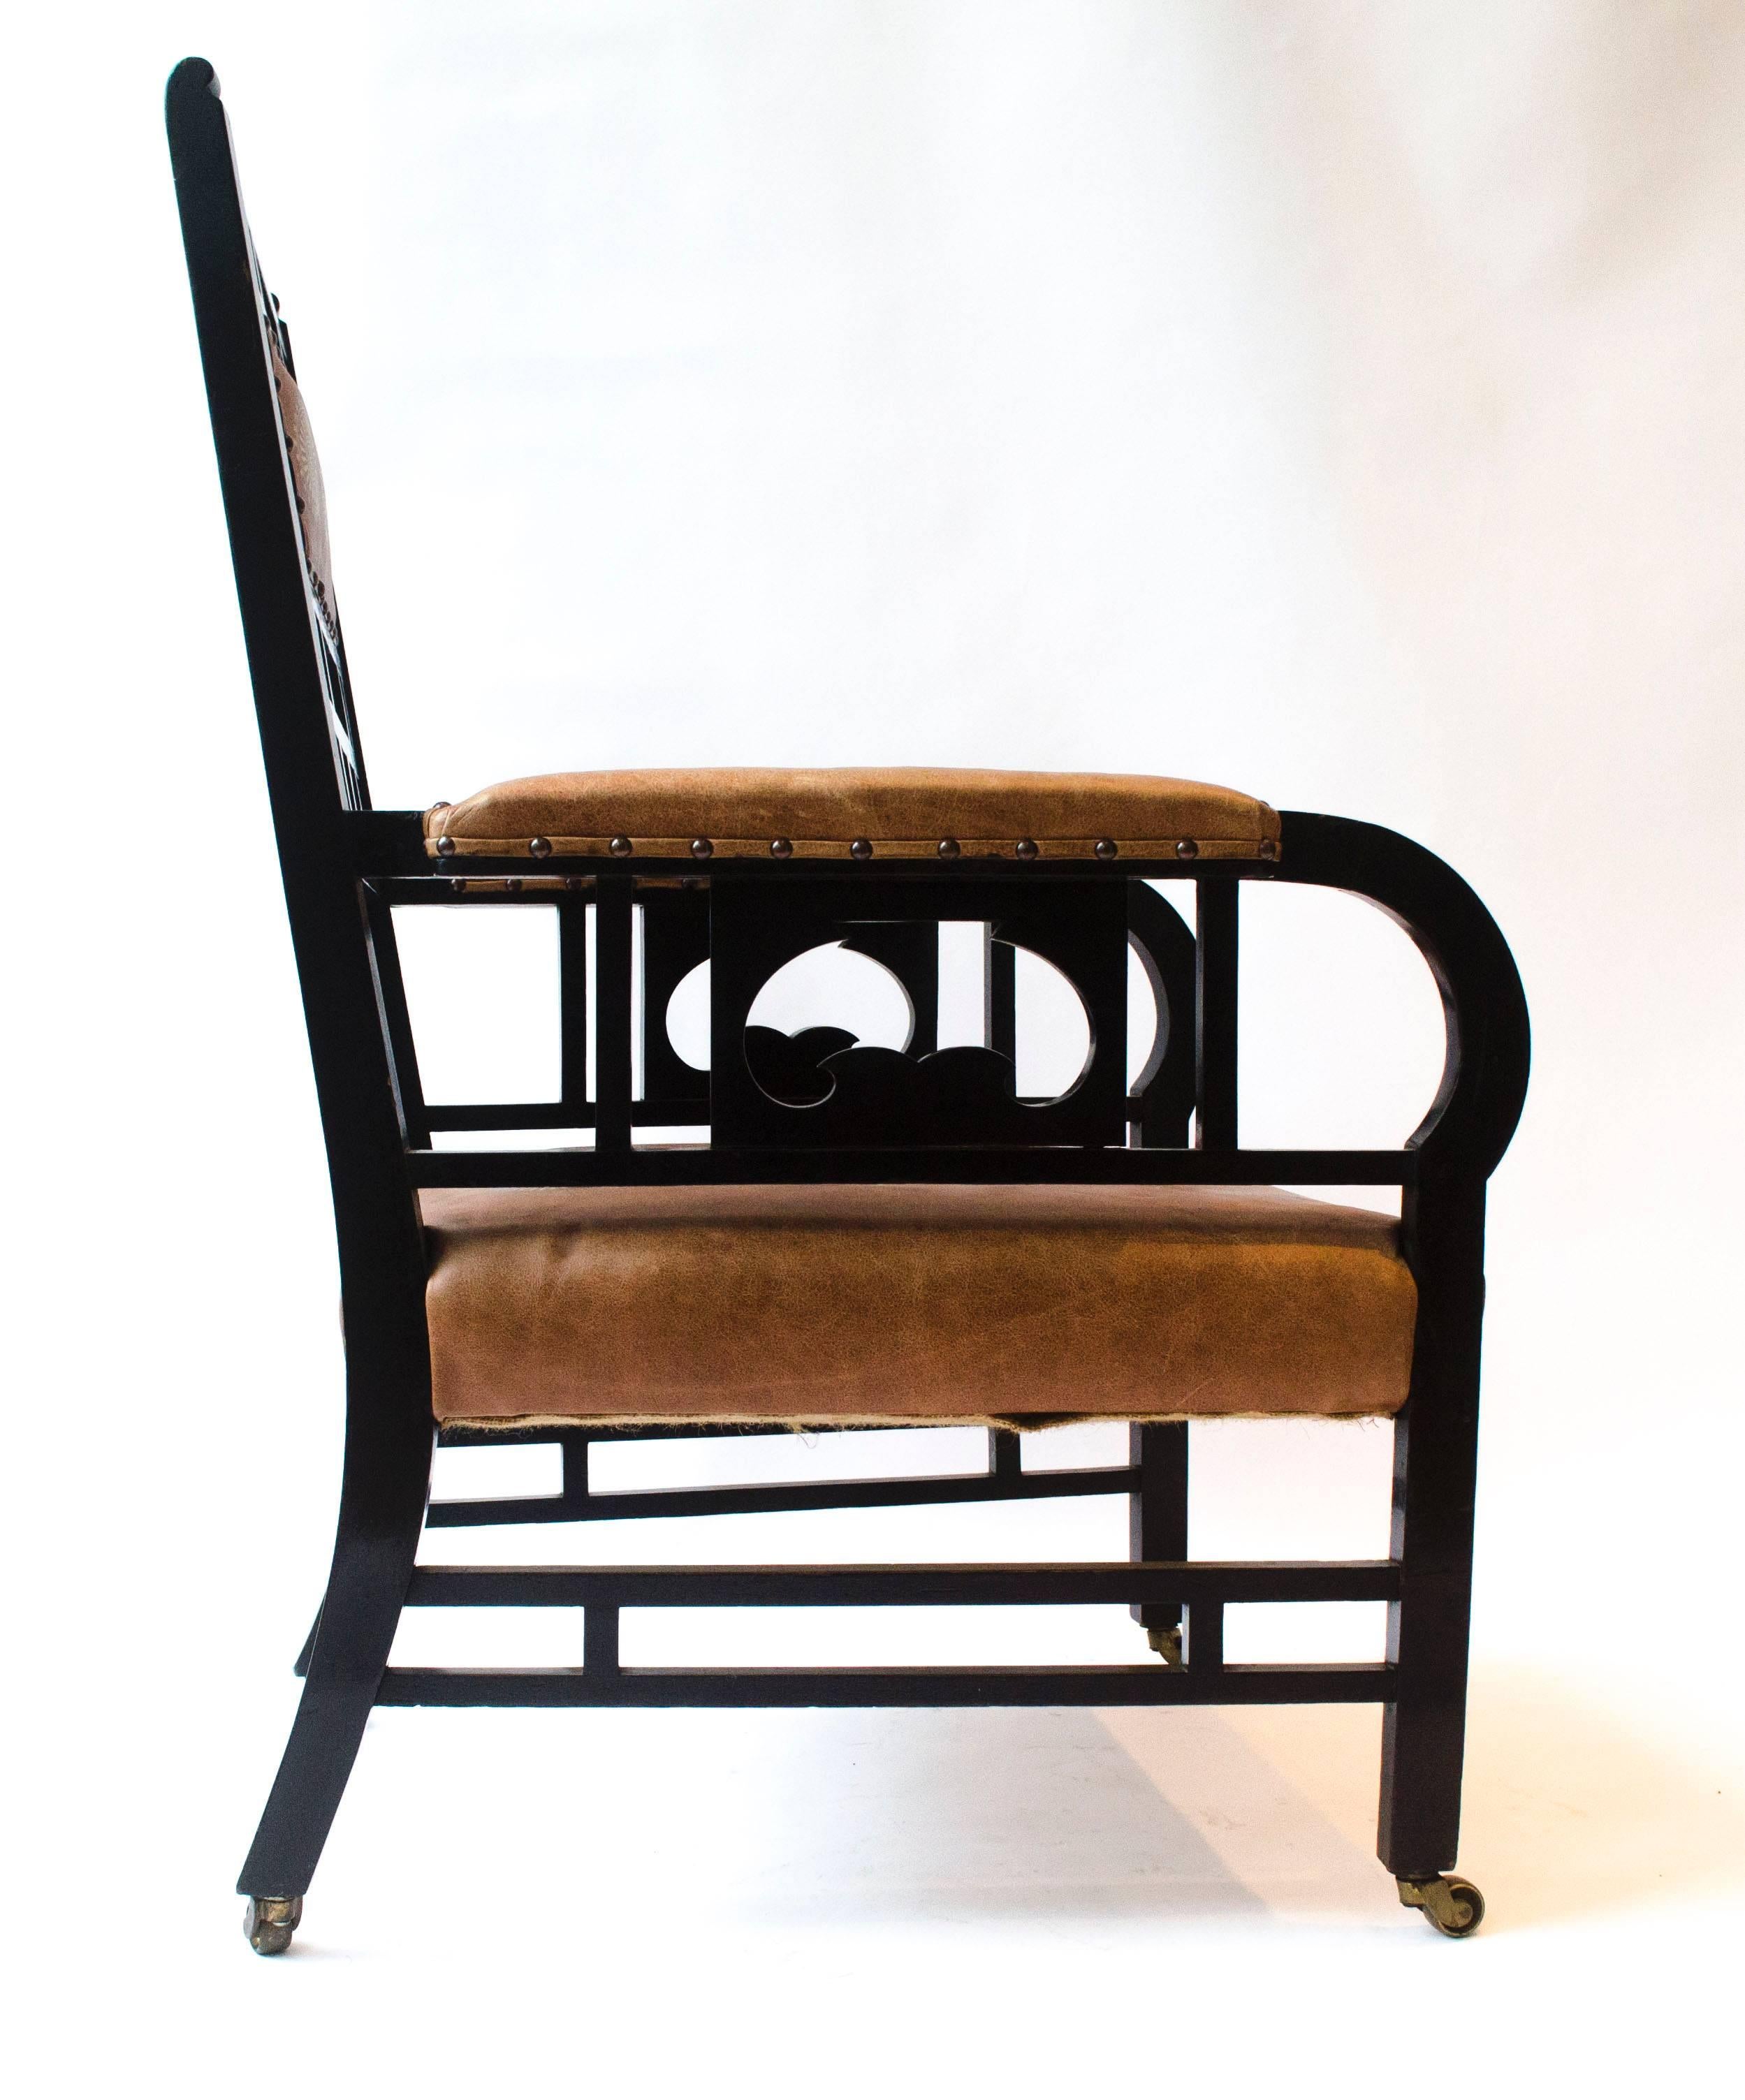 E.W. Godwin. (Attributed) an Anglo-Japanese armchair. Probably made by William Watt, the casters stamped 'Copes Patent'.
This armchair has the identical side stretchers as the front stretchers of his side chair made by W.Watt. (Illustration No